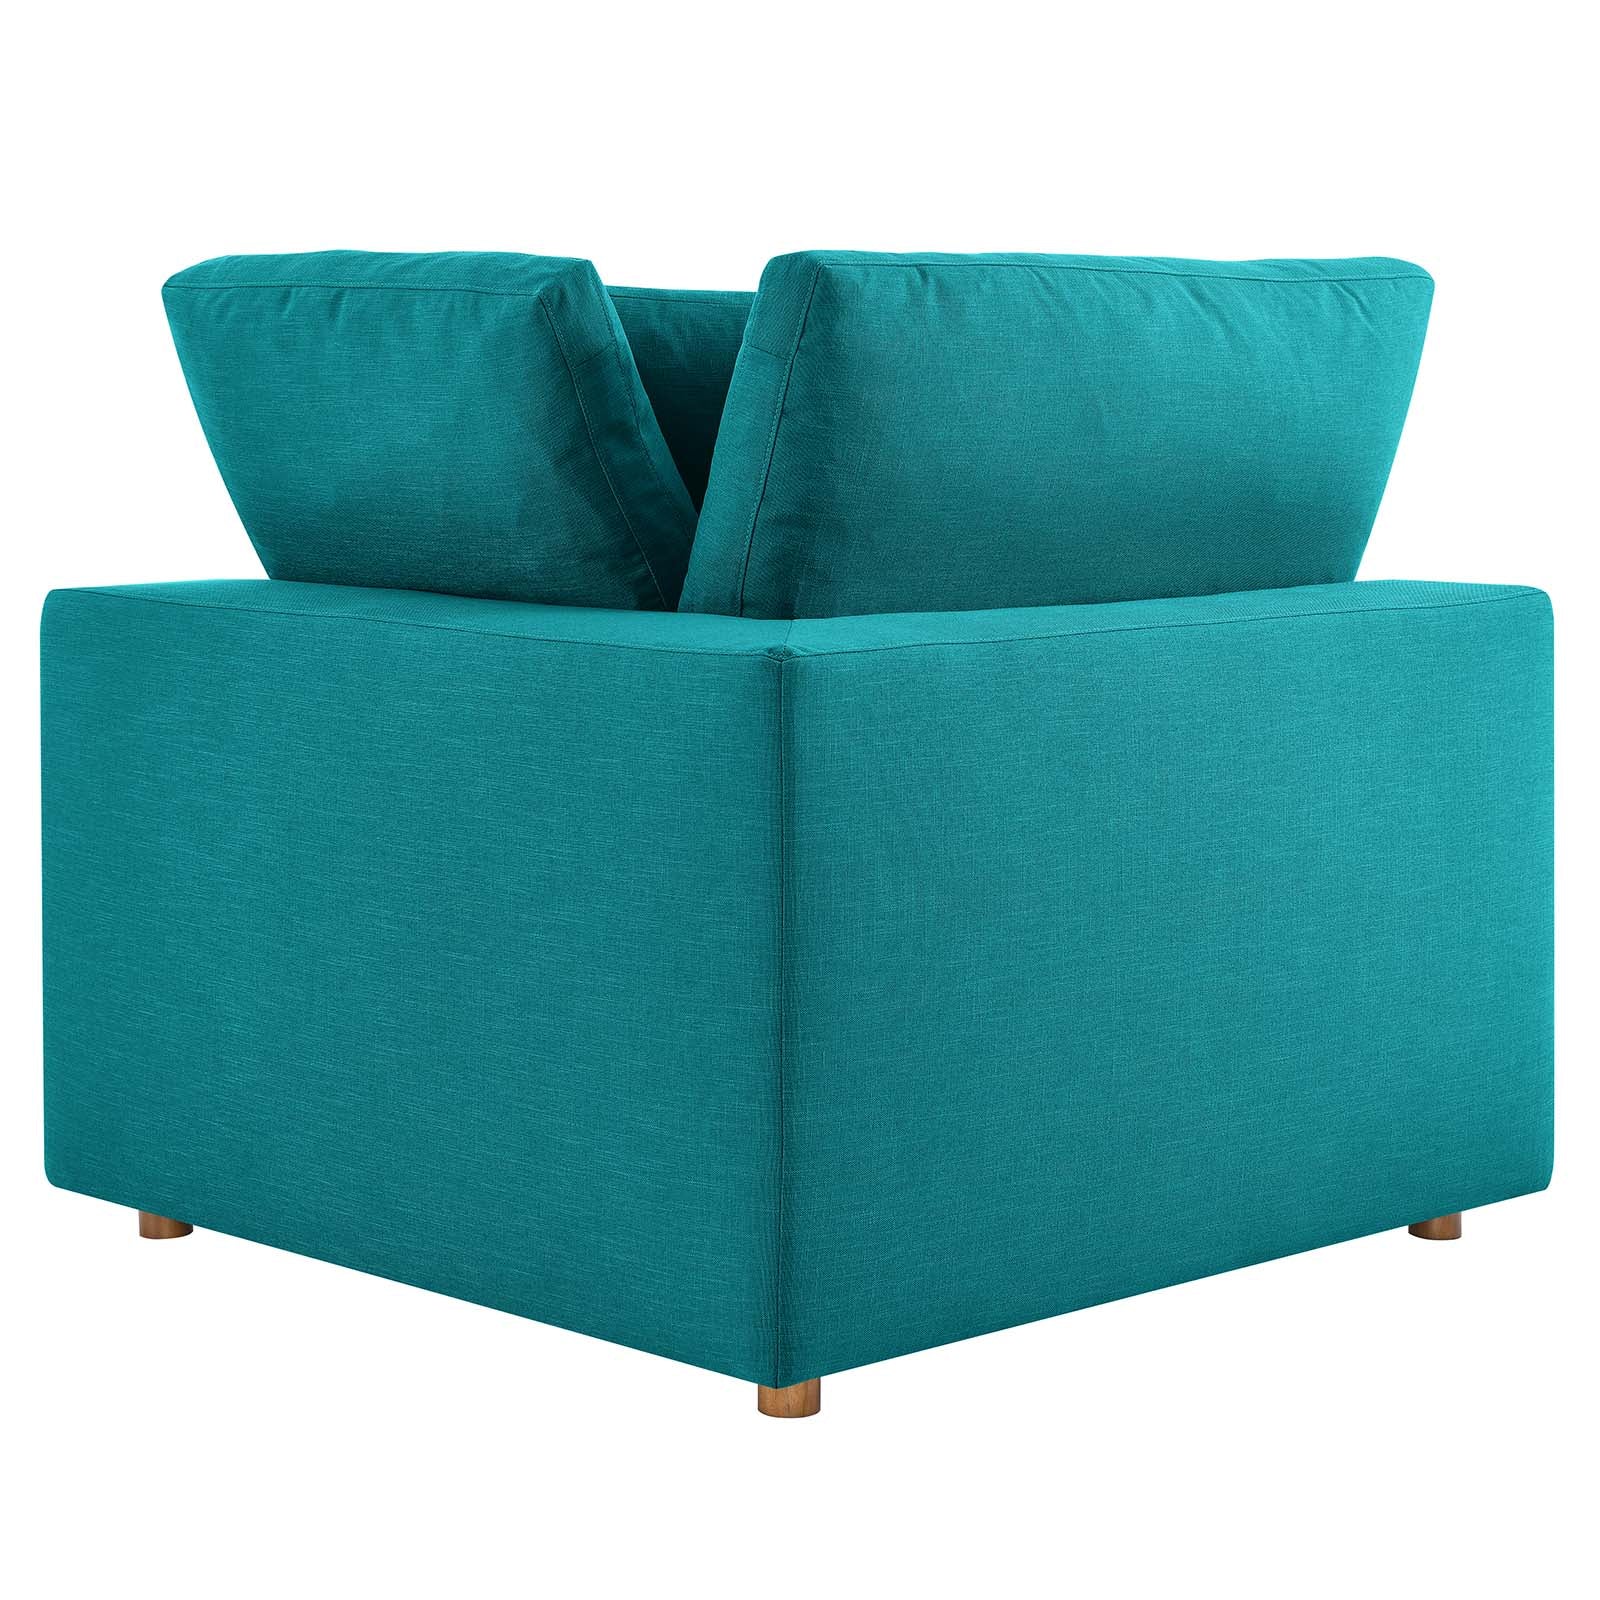 Modway Sectional Sofas - Commix Down Filled Overstuffed 3 Piece Sectional Sofa Set Teal